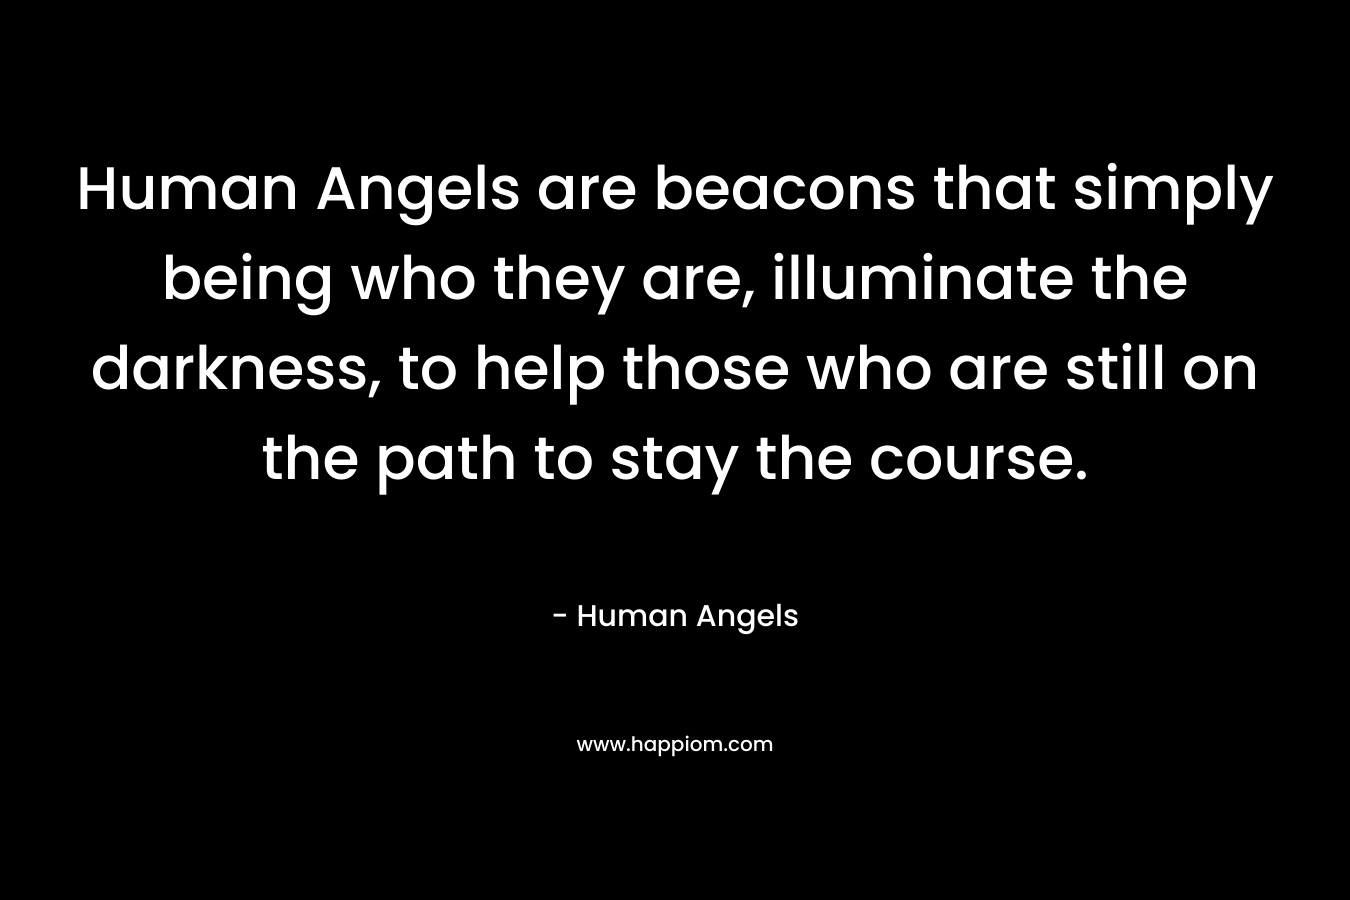 Human Angels are beacons that simply being who they are, illuminate the darkness, to help those who are still on the path to stay the course.